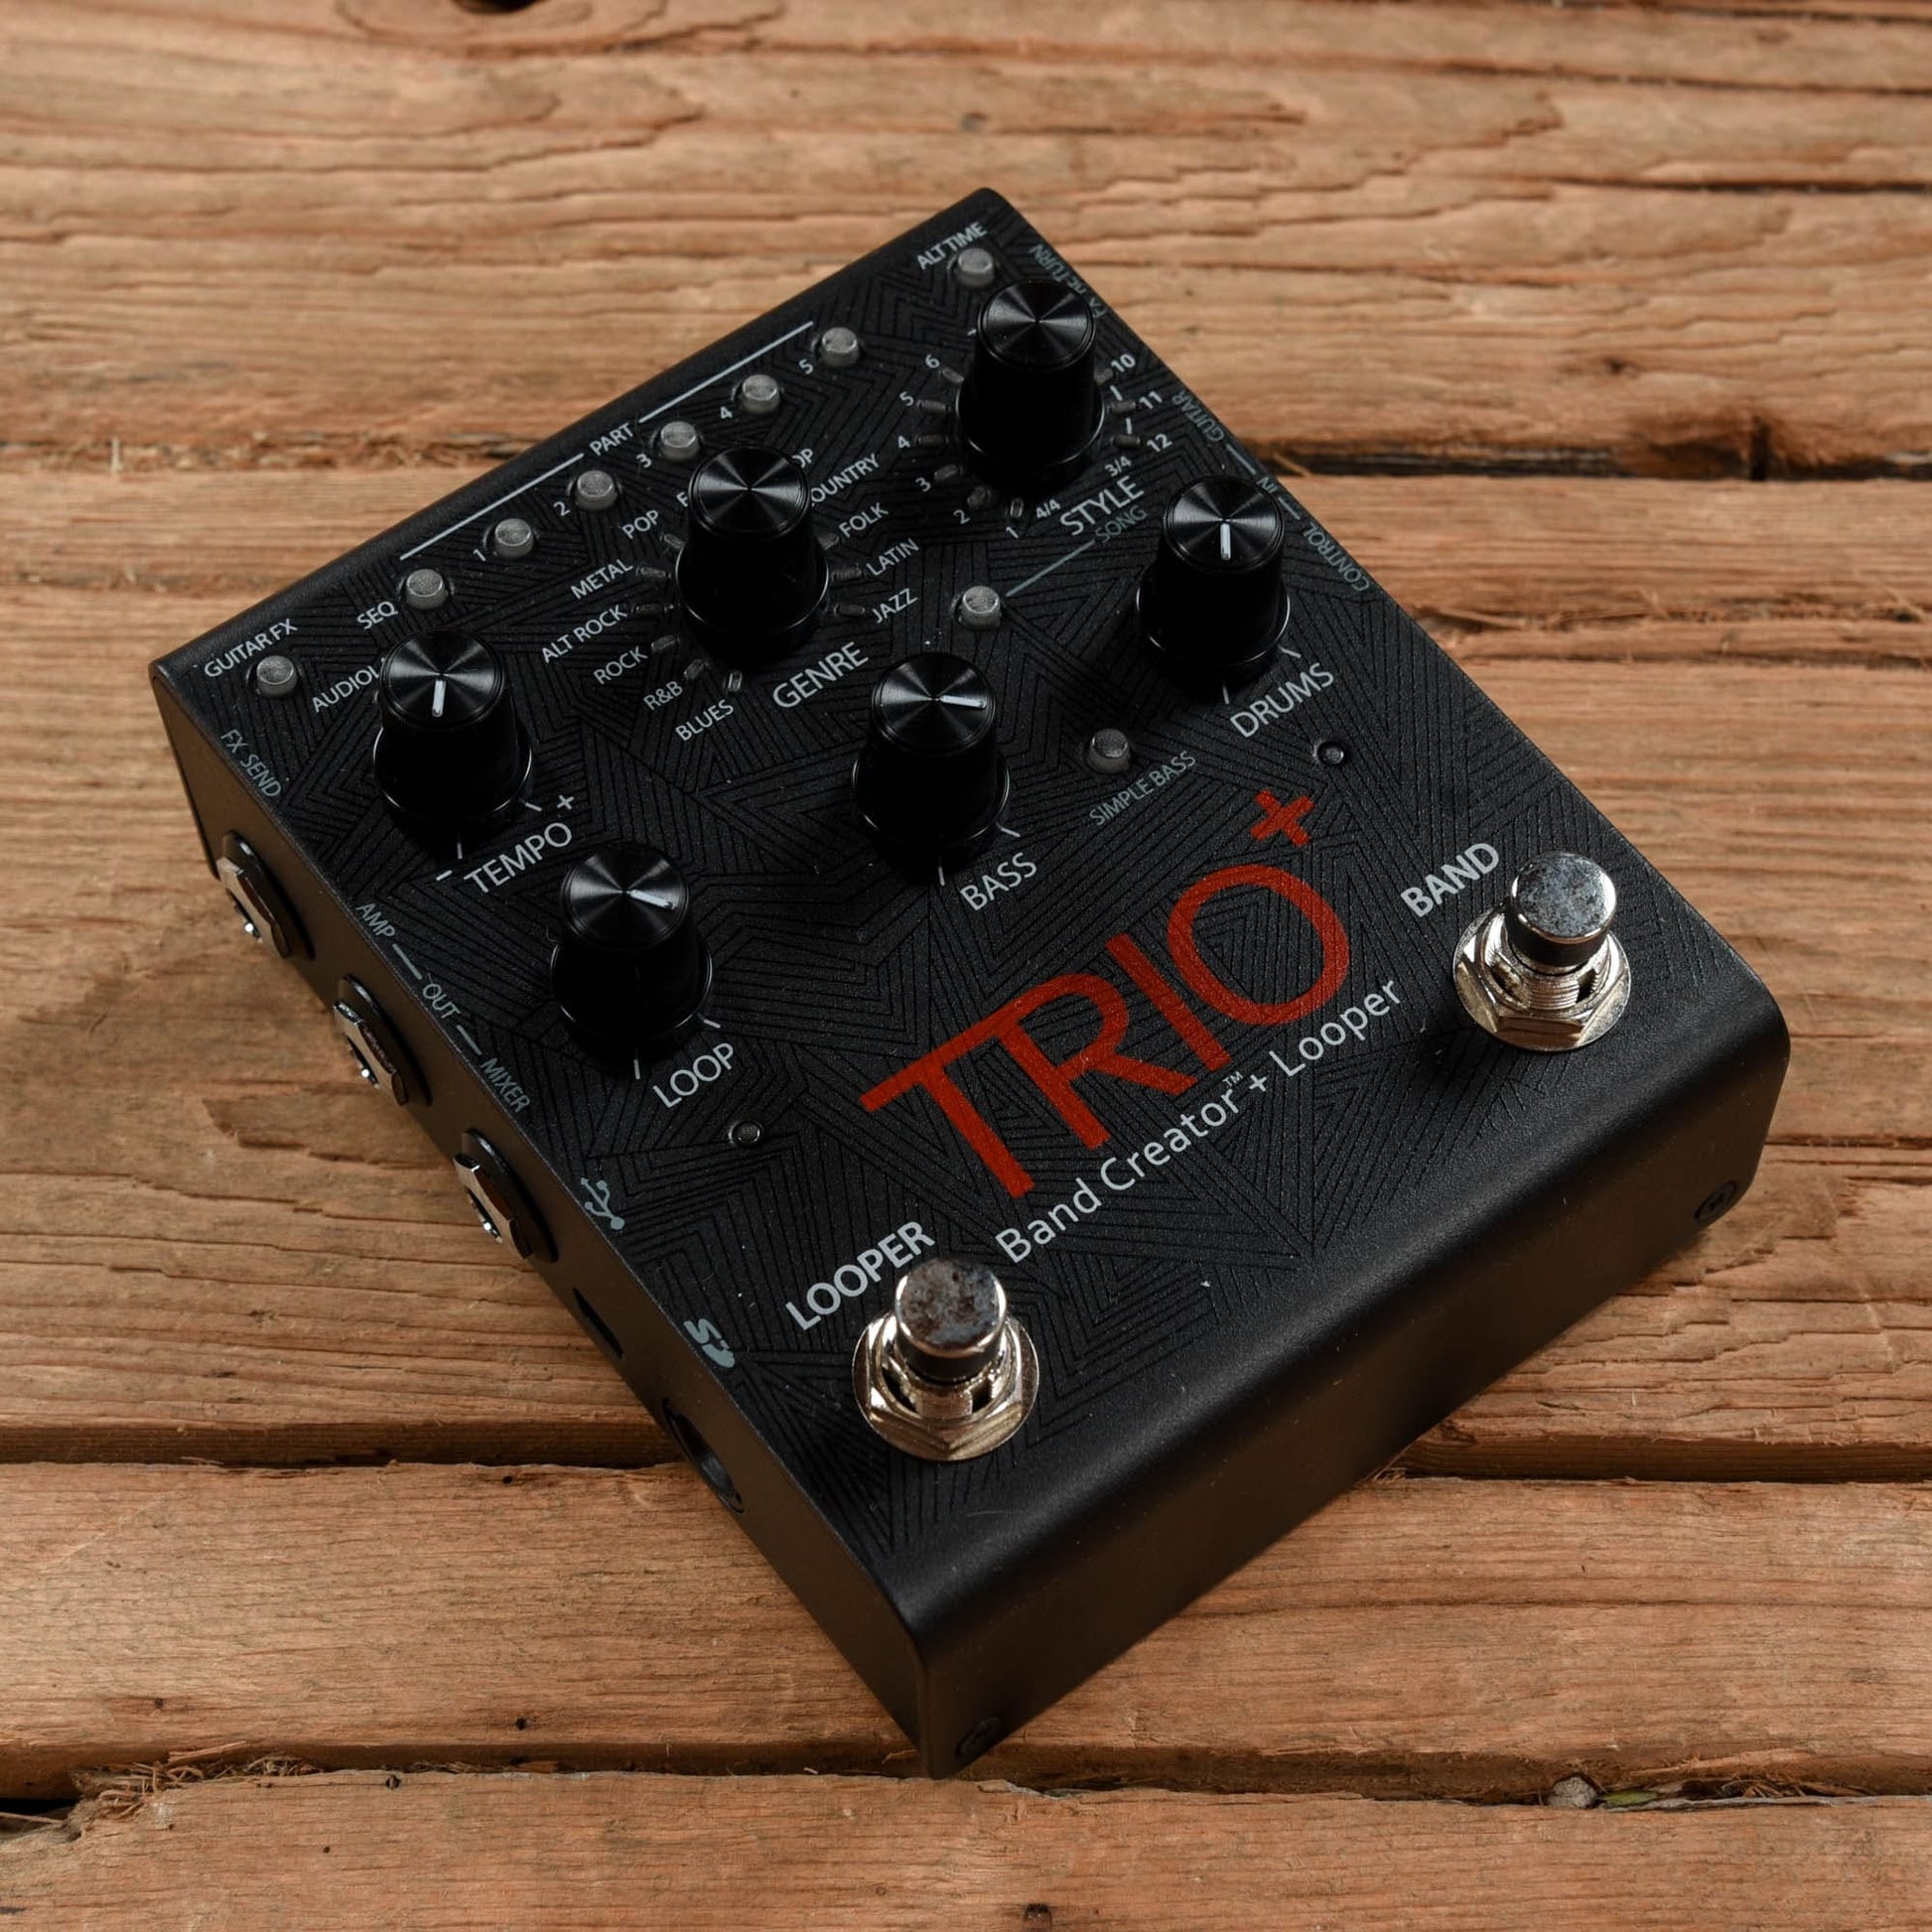 Digitech Trio+ Effects and Pedals